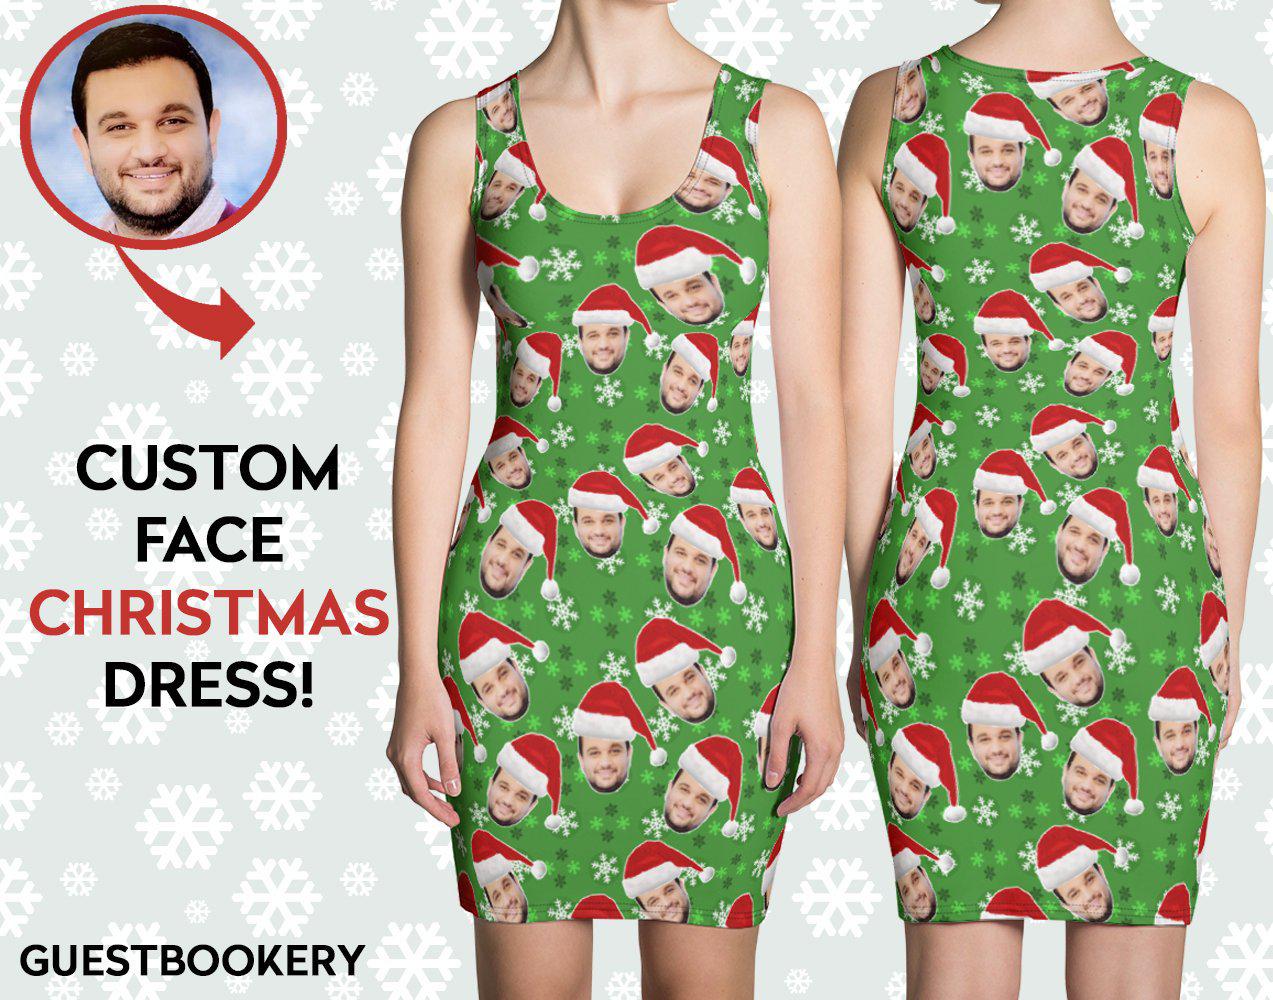 Custom Faces Christmas Green Dress - Ugly Christmas Dress - Guestbookery